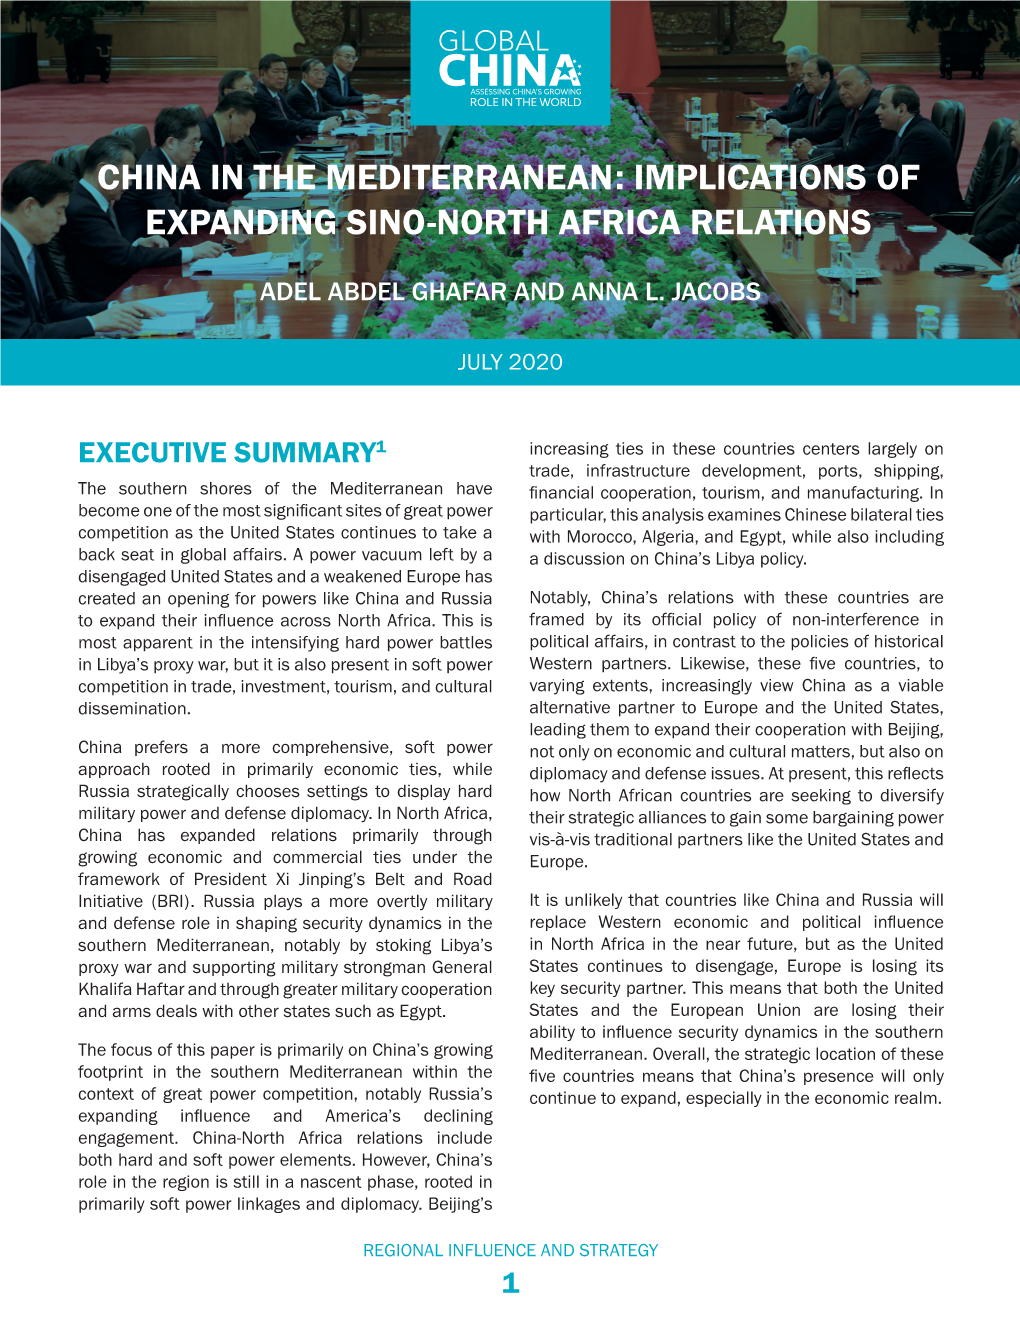 China in the Mediterranean: Implications of Expanding Sino-North Africa Relations